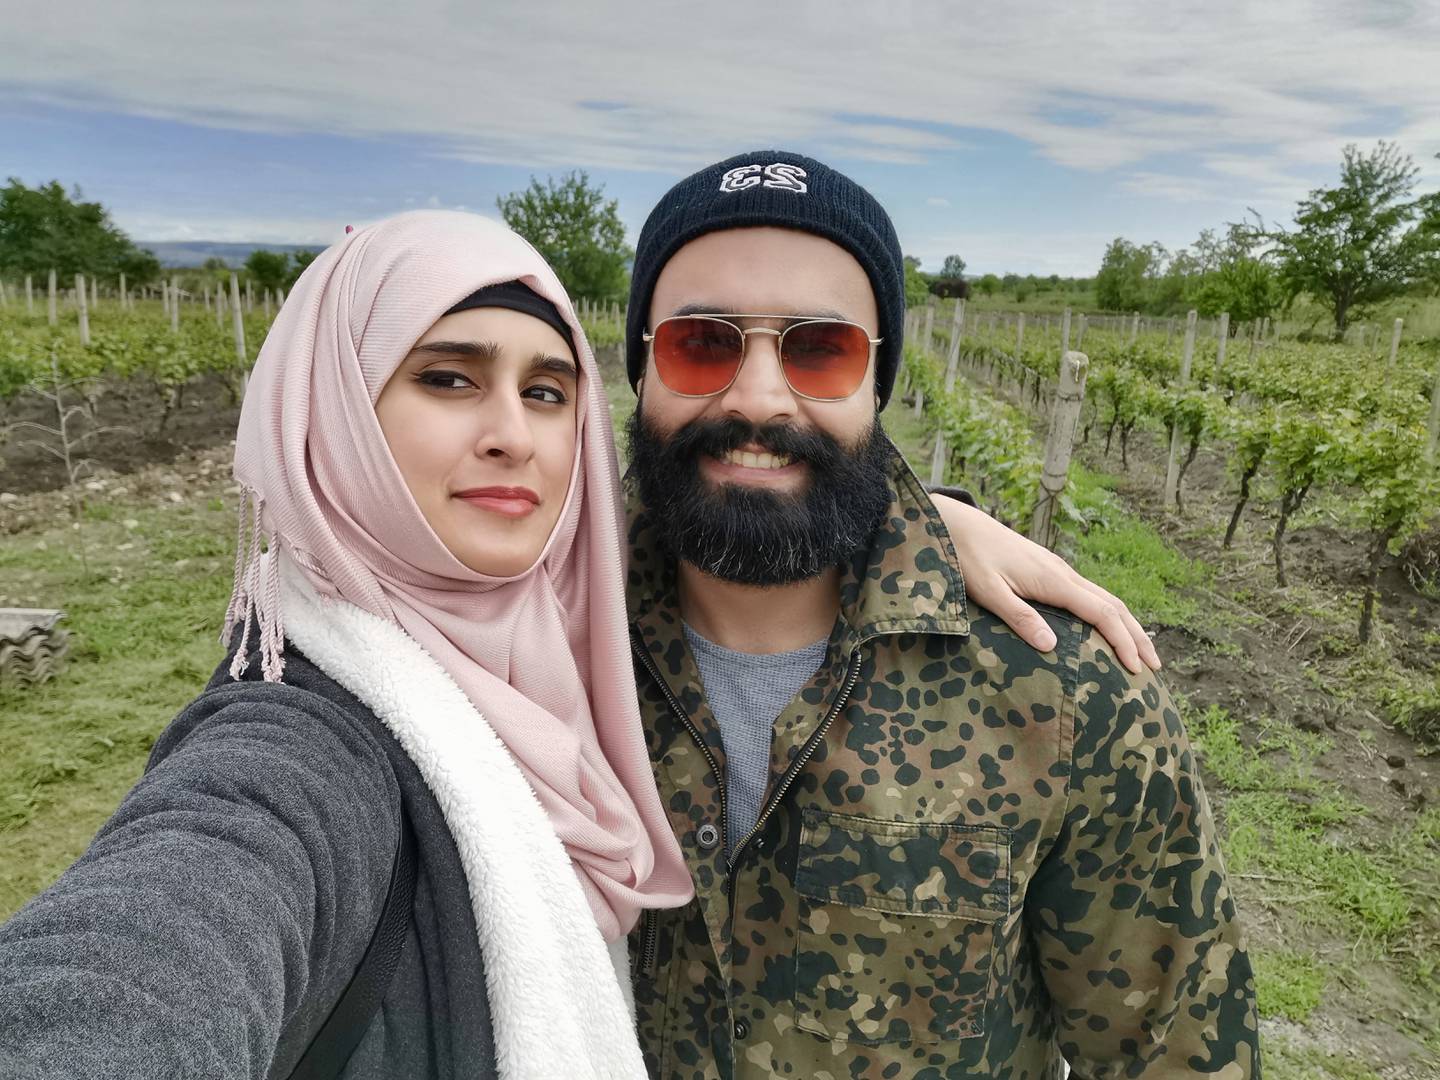 Maira Omer and her husband M Omer Farooq during their holiday in Georgia in May. Photo: Maira Omer
